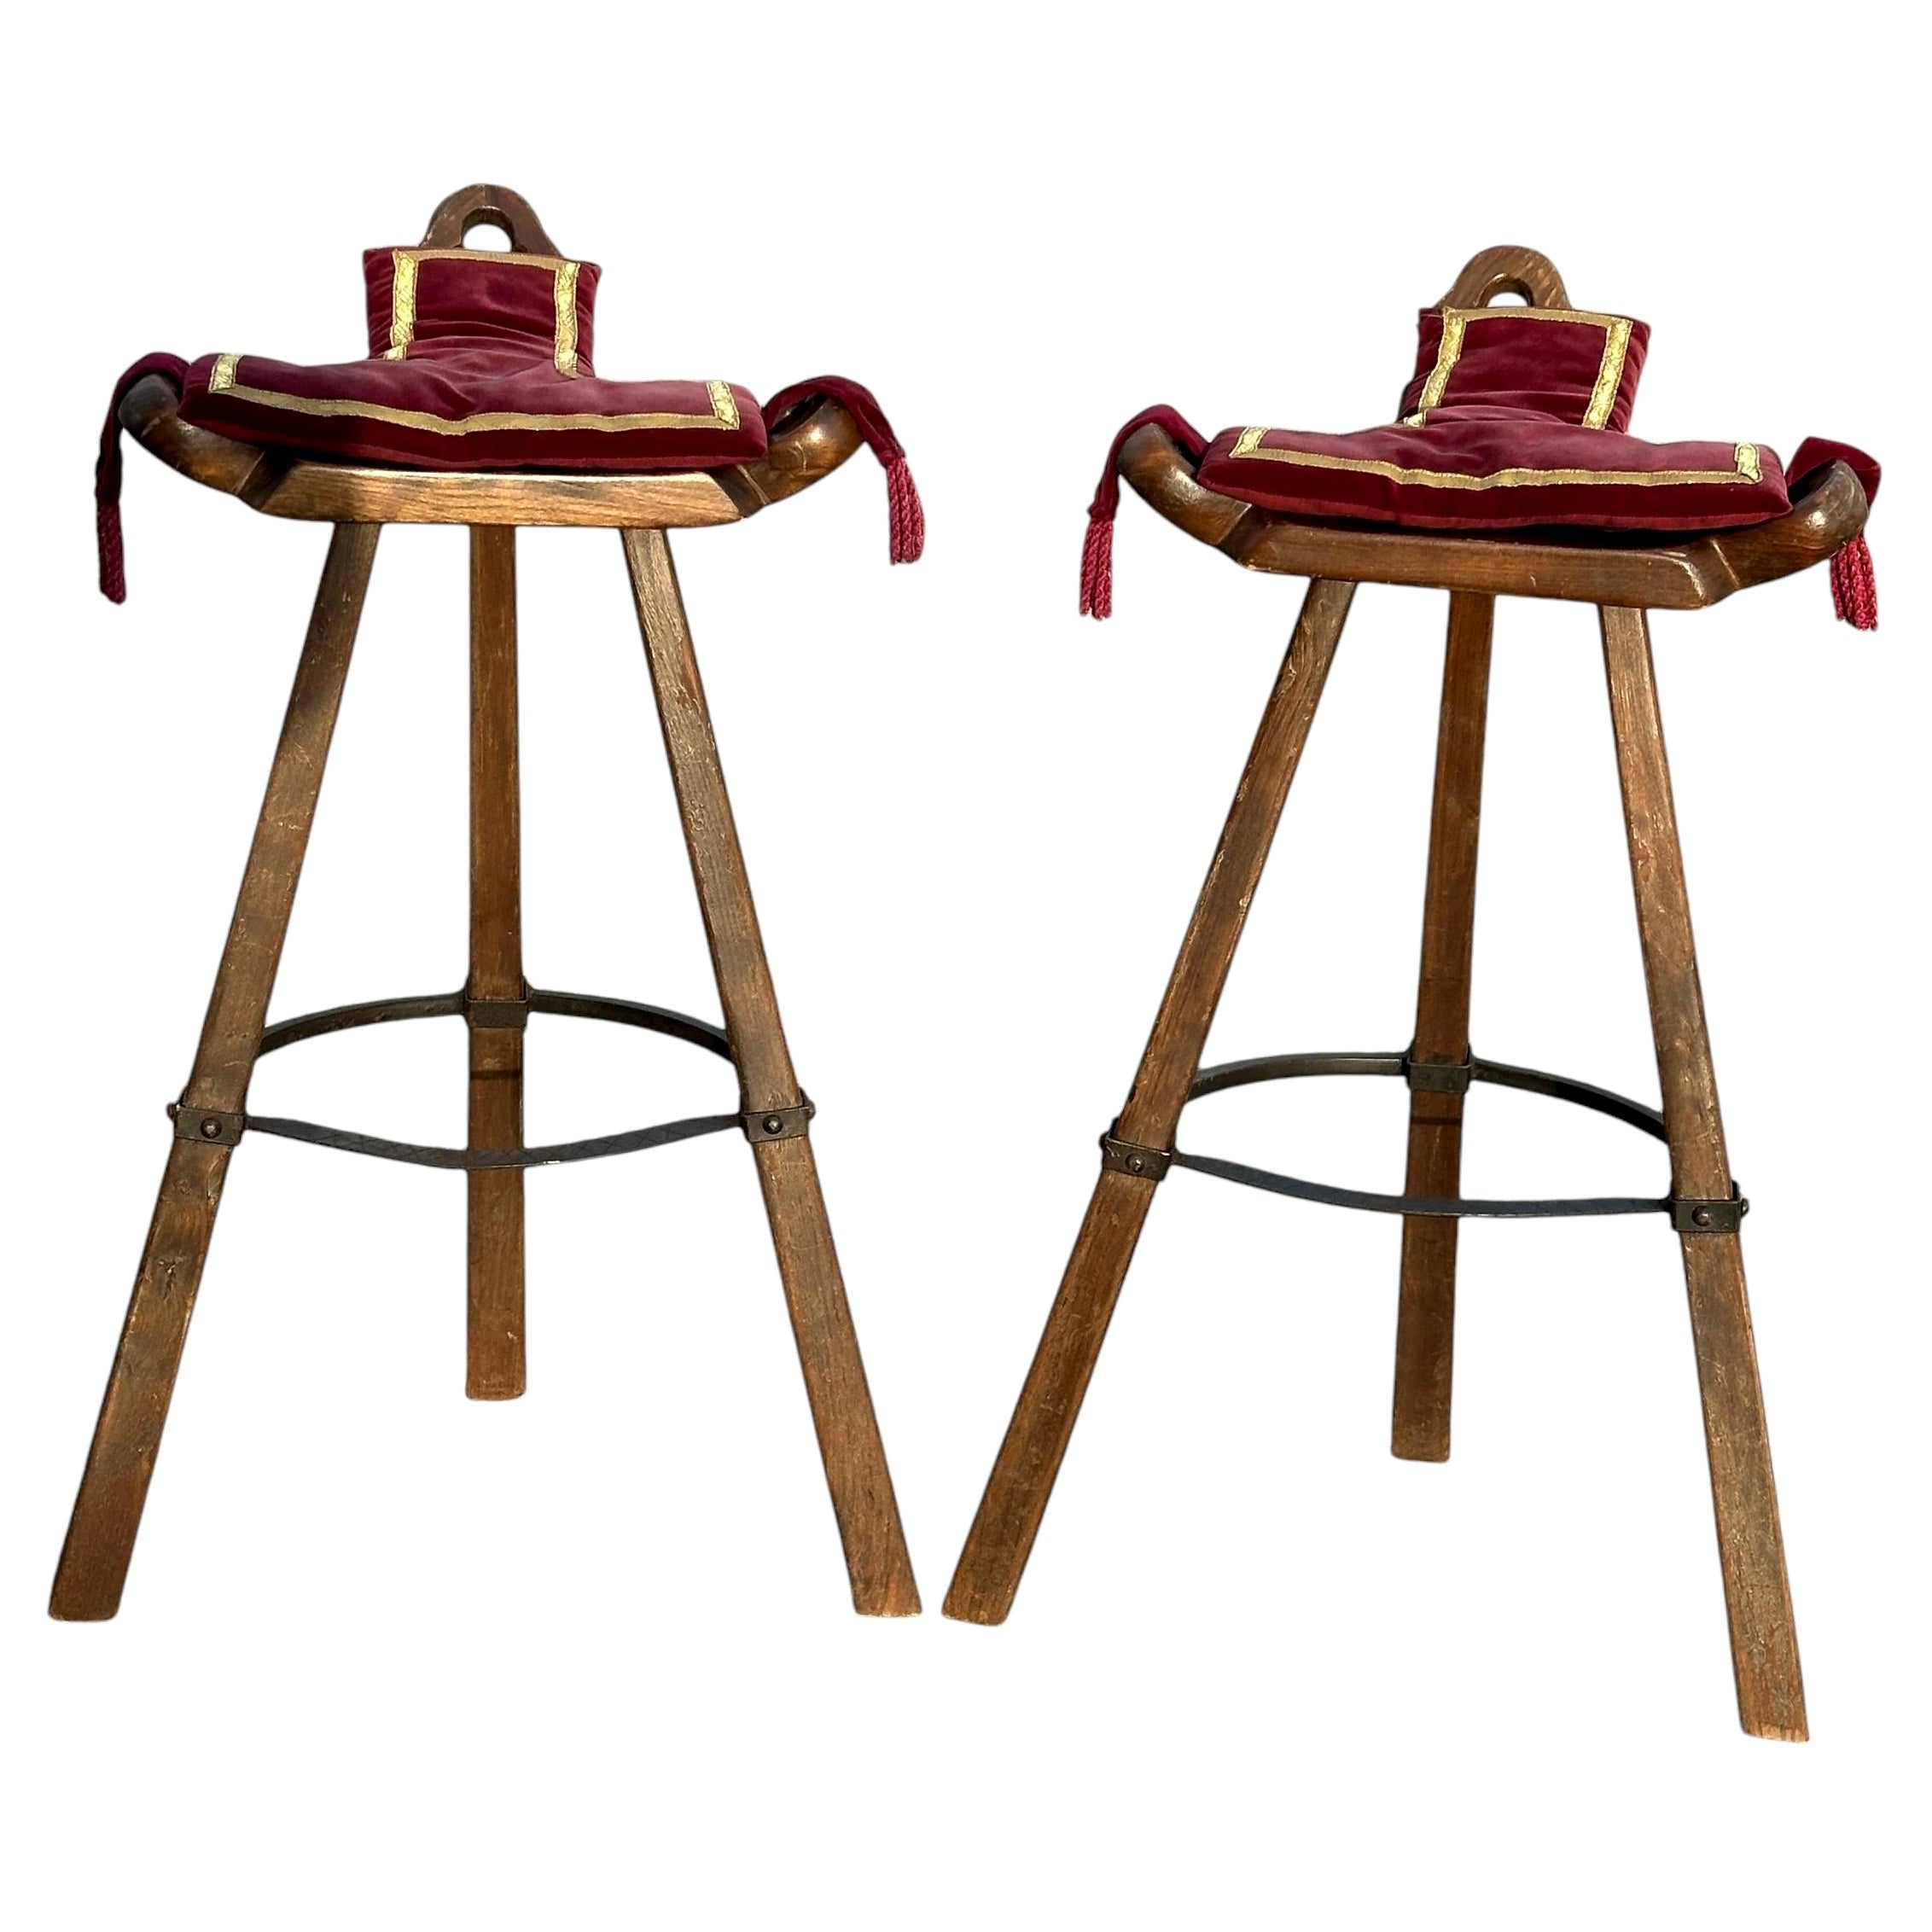 Set of Two Brutalist Bull Barstools Marbella with original Cushion, 1970s For Sale